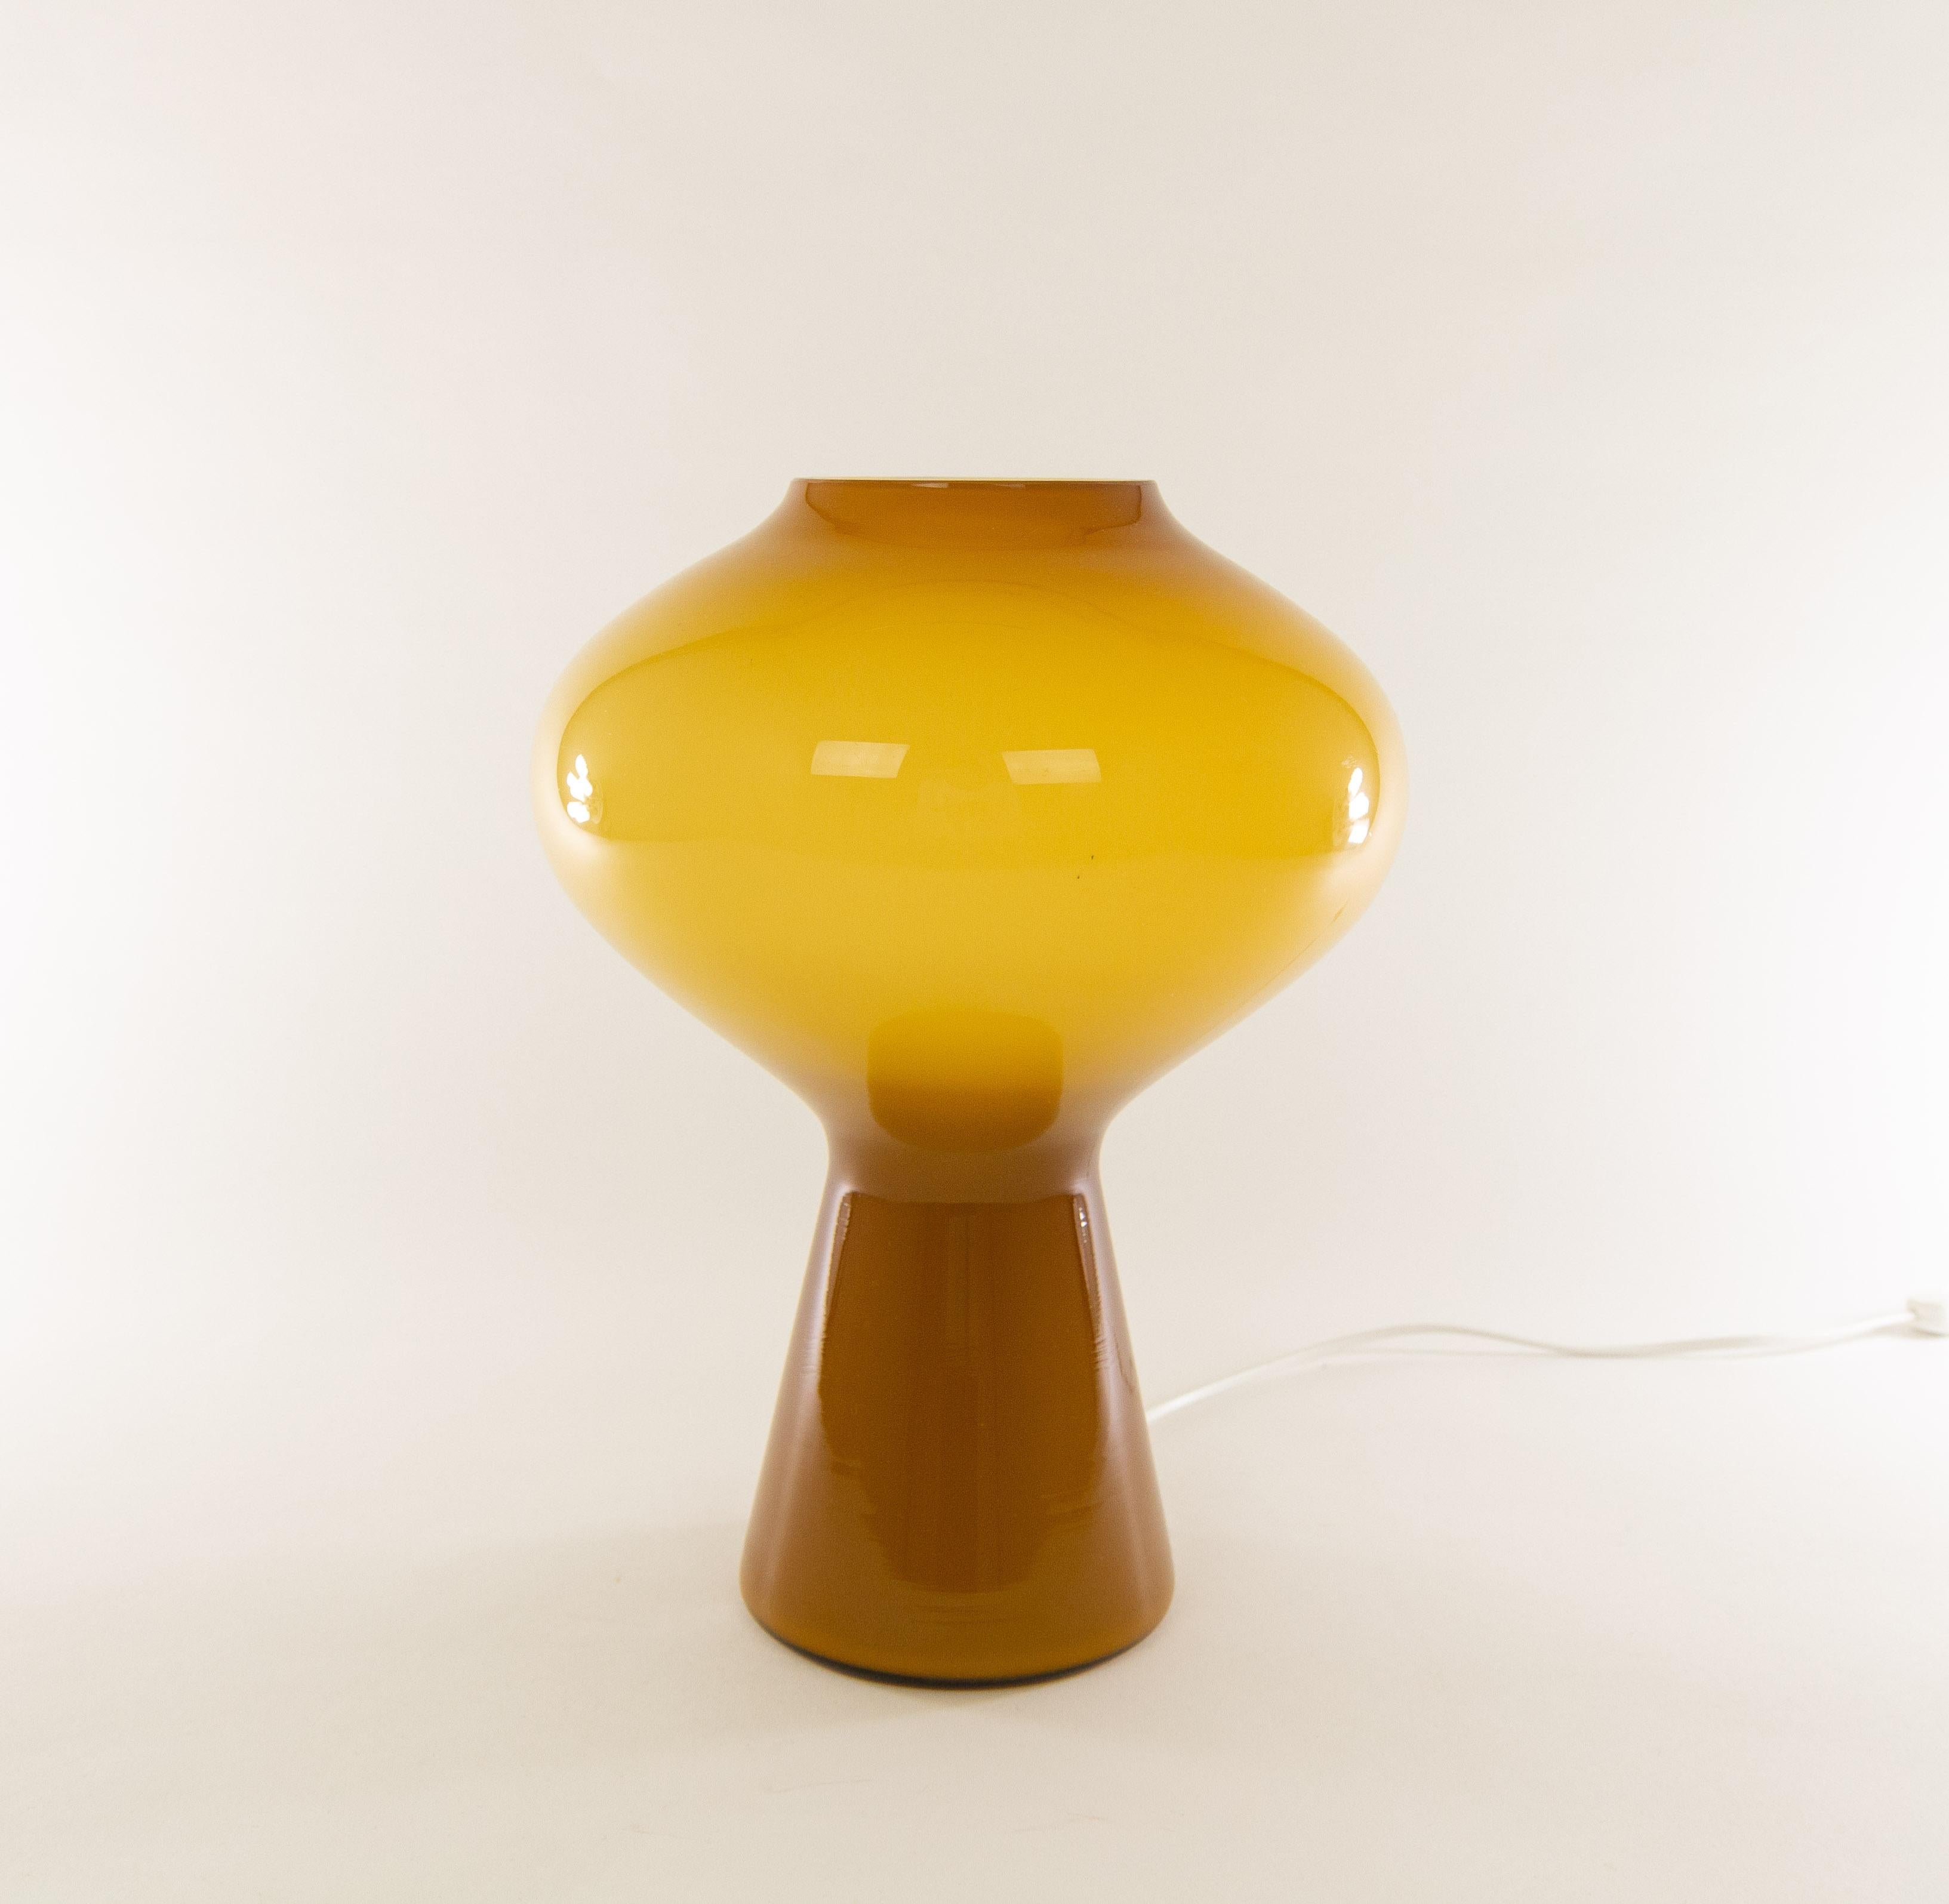 A hand blown amber colored glass Fungo table lamp designed by Massimo Vignelli at the start of his impressive career in design and executed by Murano glass specialist Venini. 

This is the largest size of the Fungo table lamp (for the difference